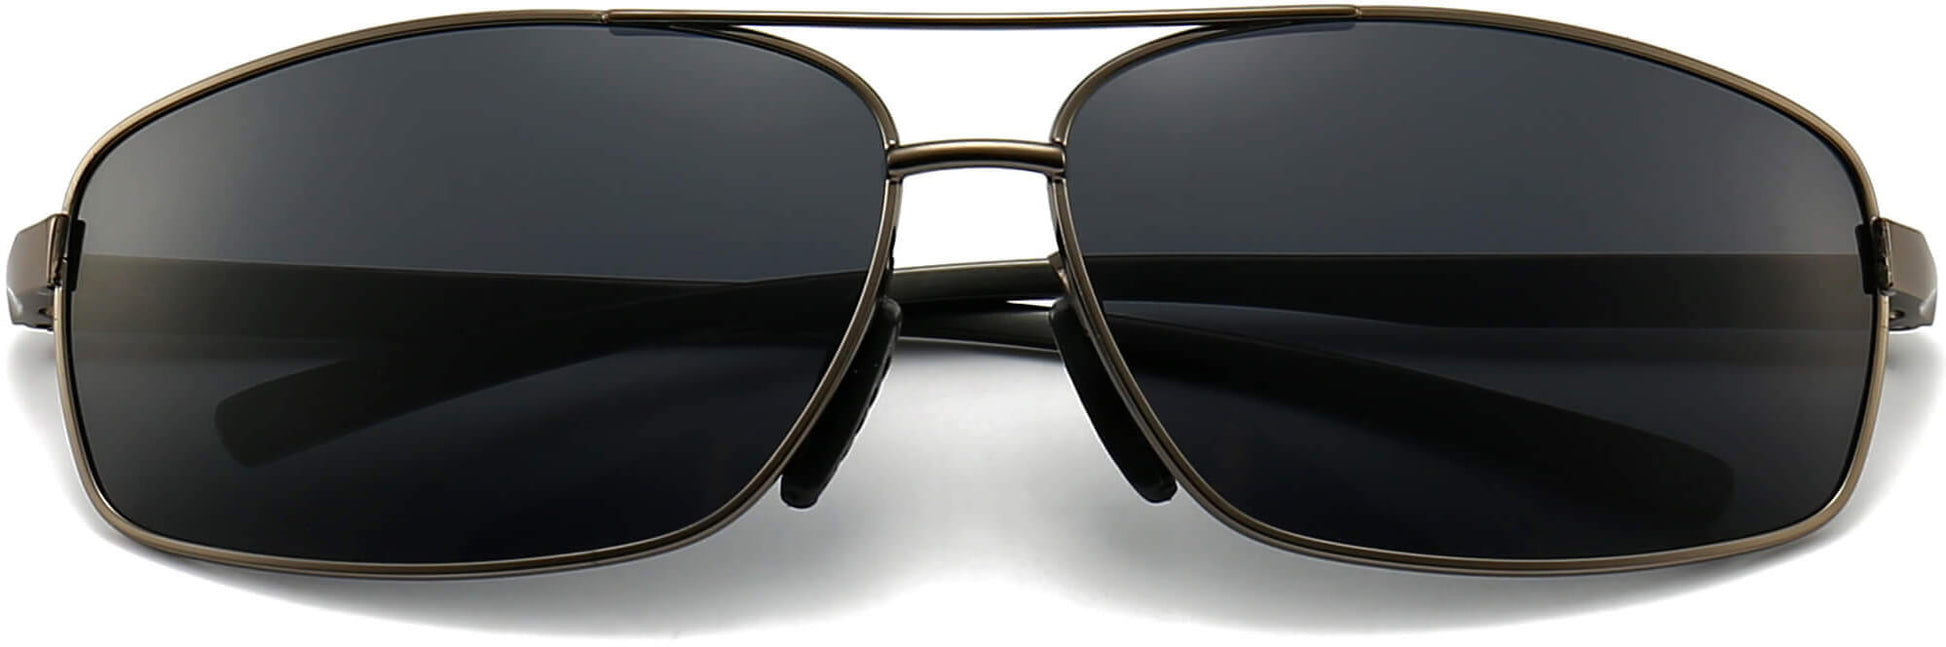 Madison Black Stainless steel Sunglasses from ANRRI, closed view